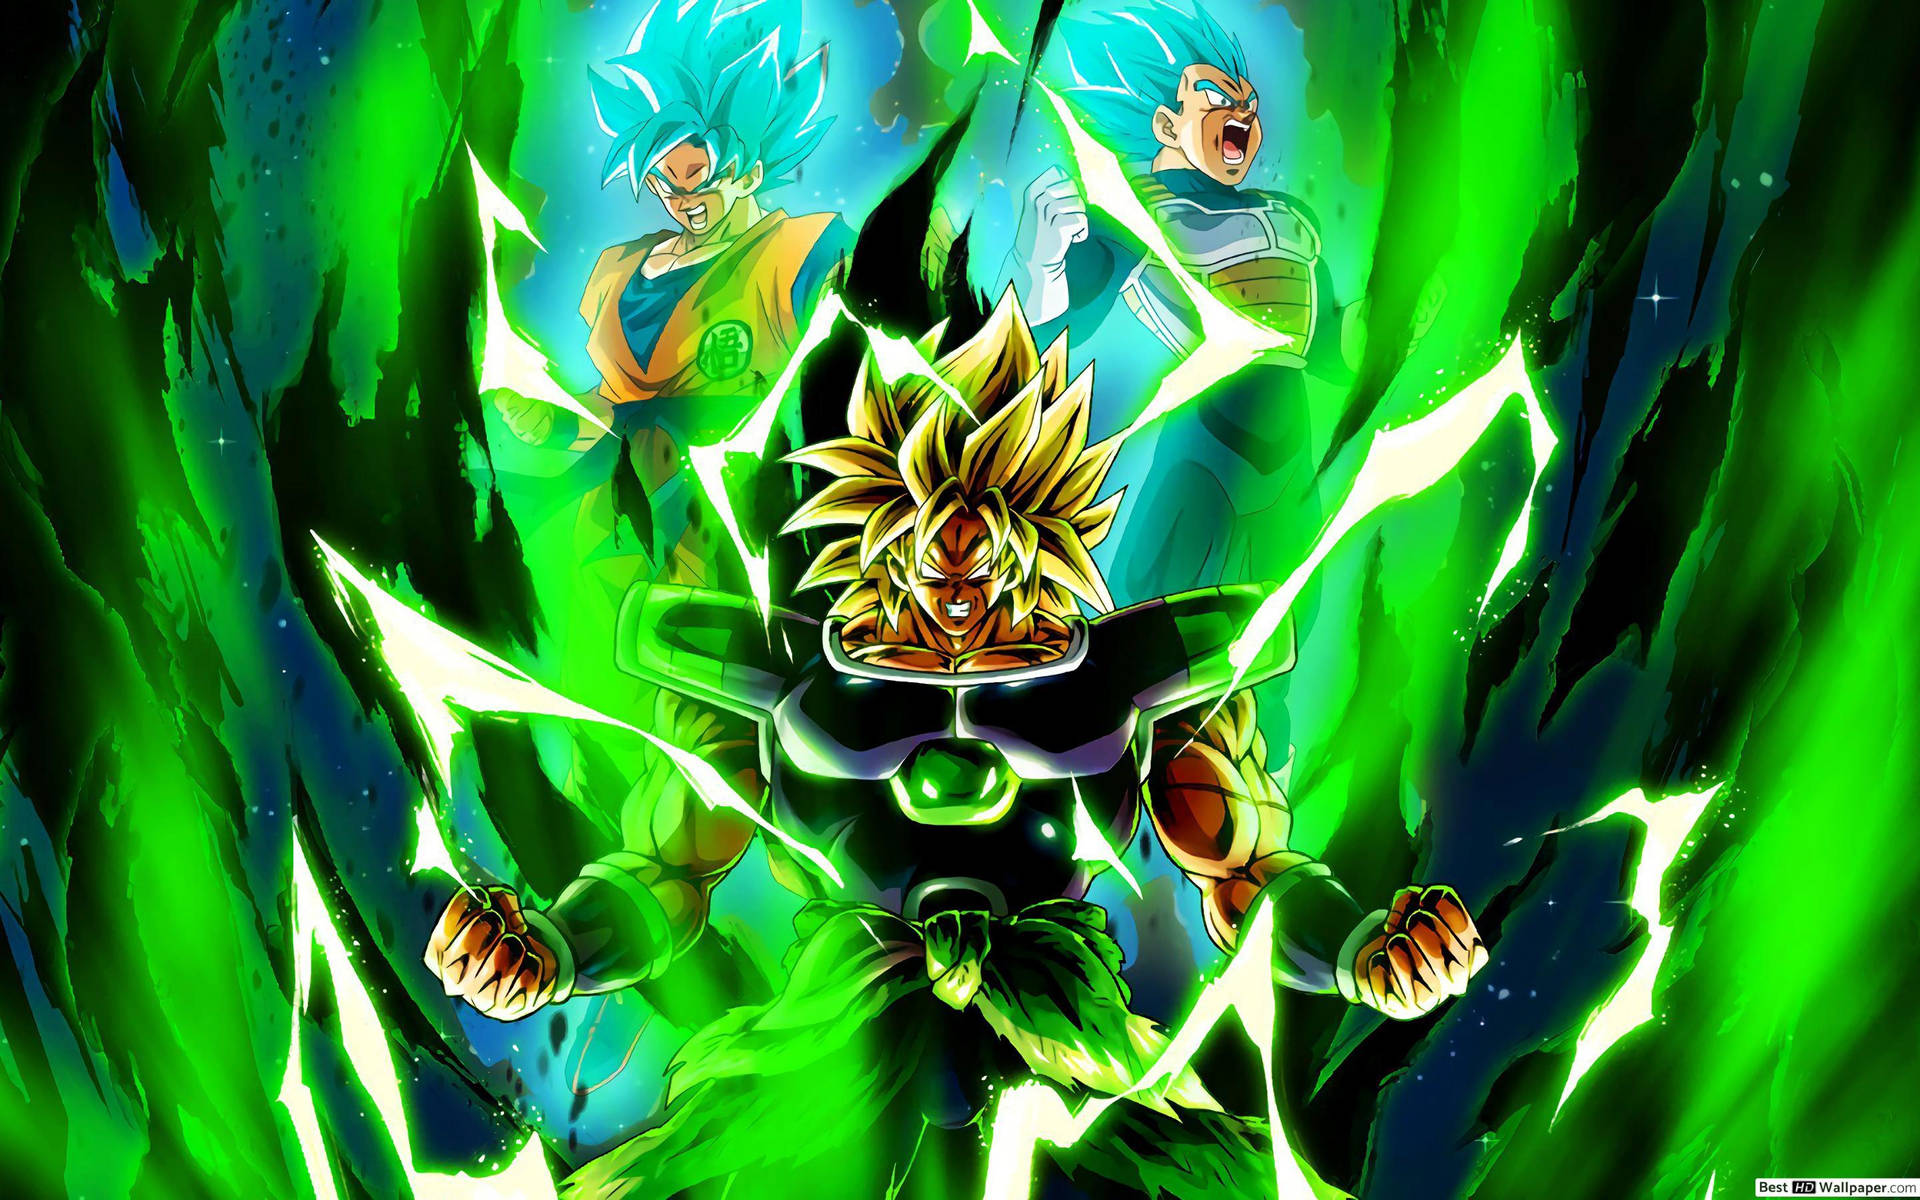 Unlock the power of the legendary Super Saiyan with Dragon Ball Super Broly Wallpaper